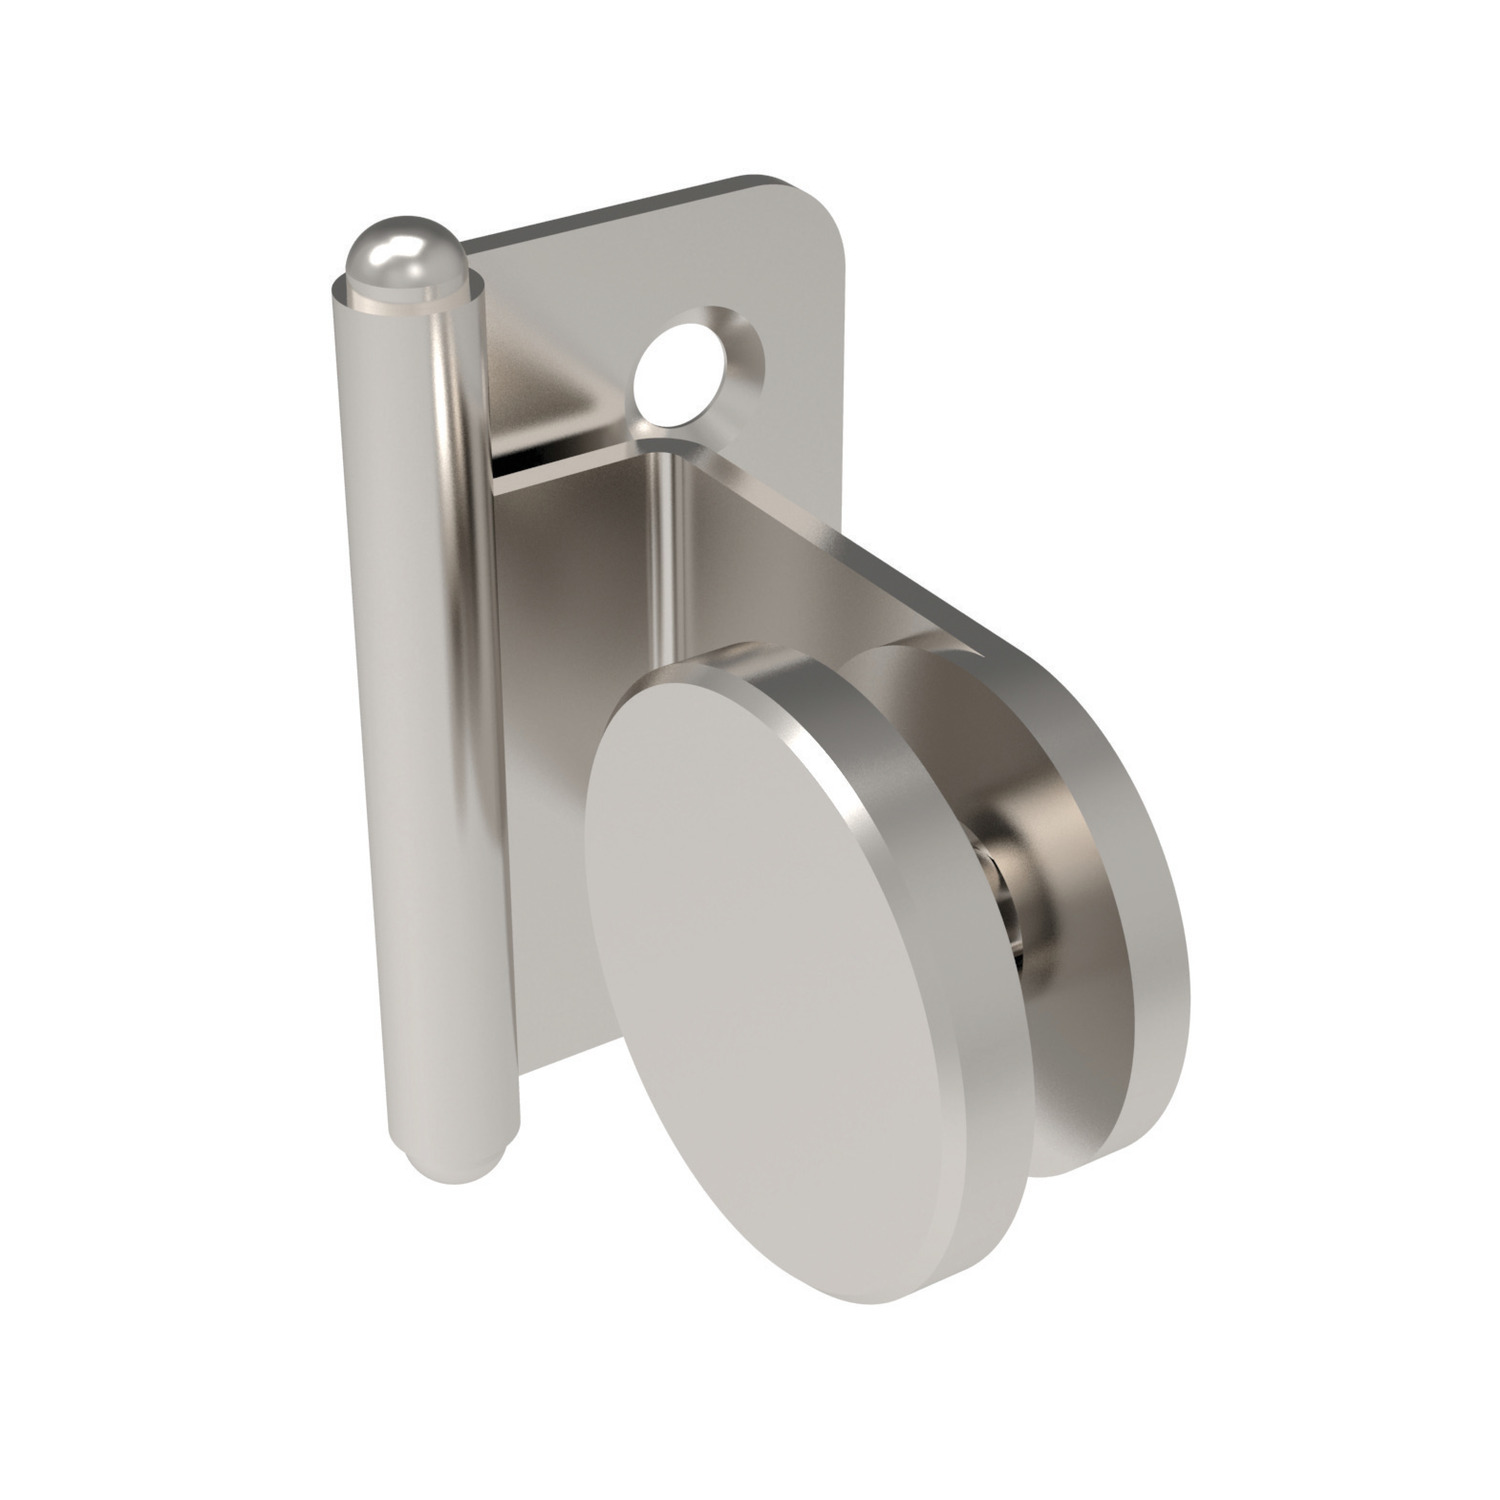 Glass Door Hinges - Inset Type Polished stainless steel (AISI 304), suitable for door thicknesses 4 - 6 mm. Drilling is needed for fitting.